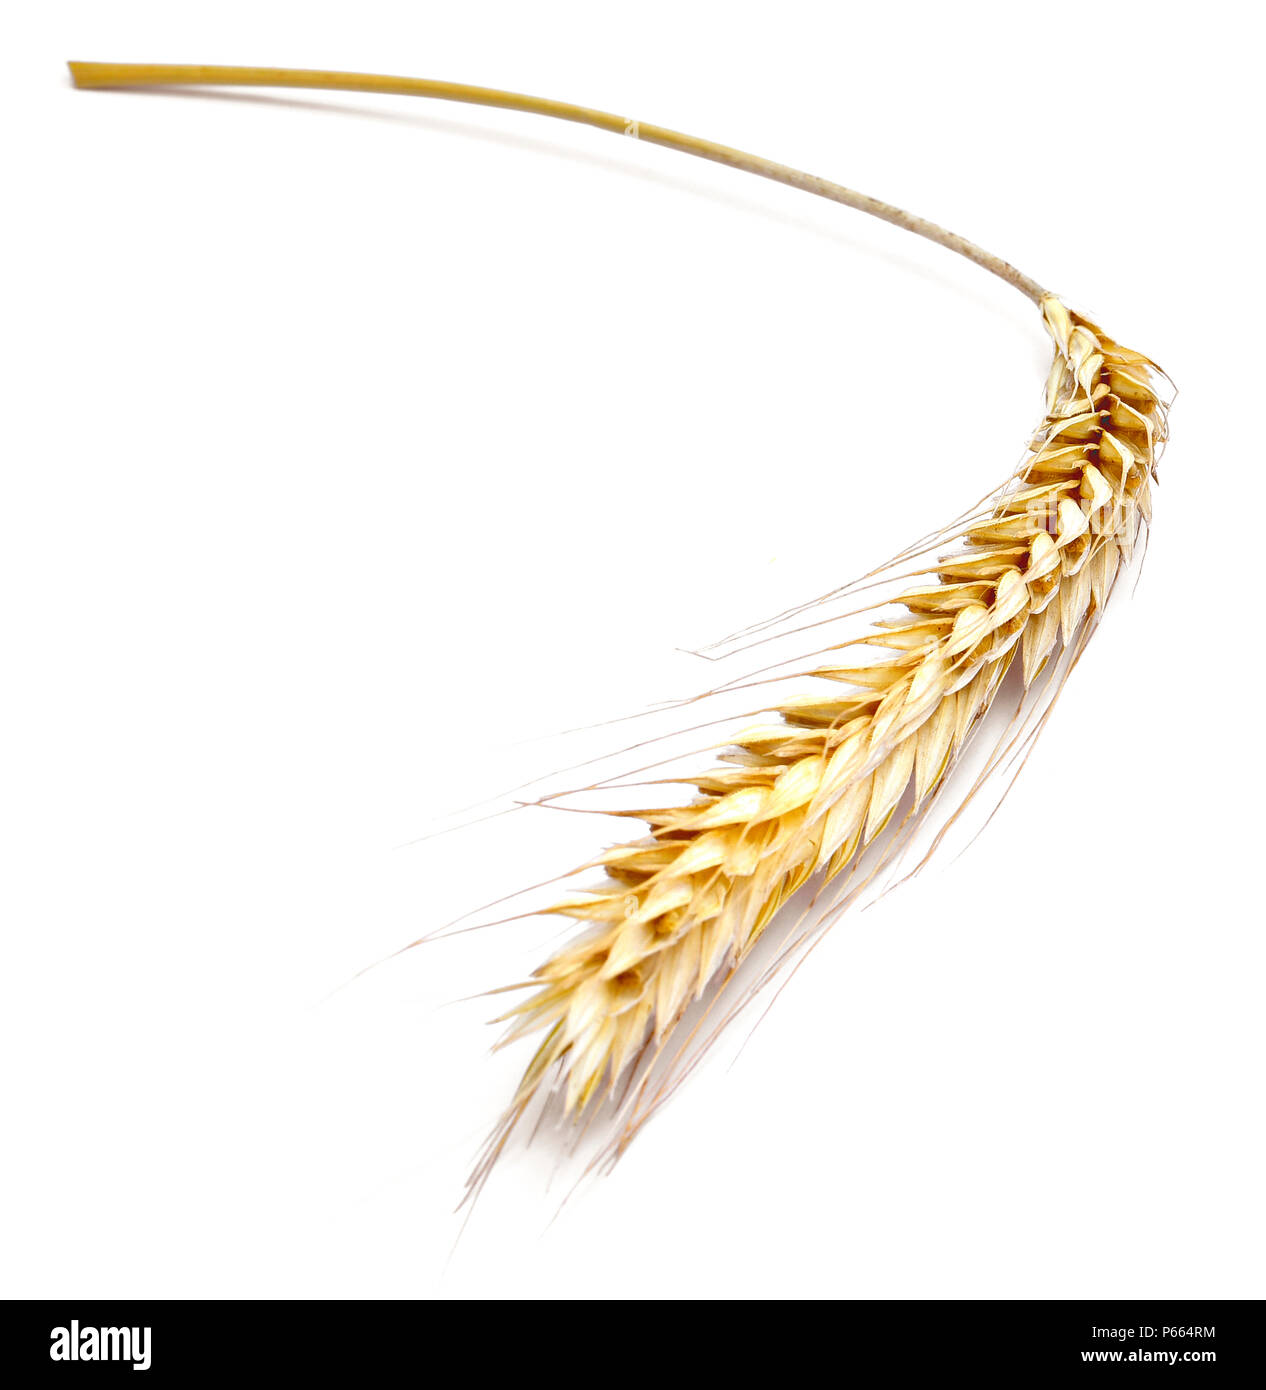 Ripe ear of rye or barley, isolated on white background. Decorative cereal plants. Stock Photo